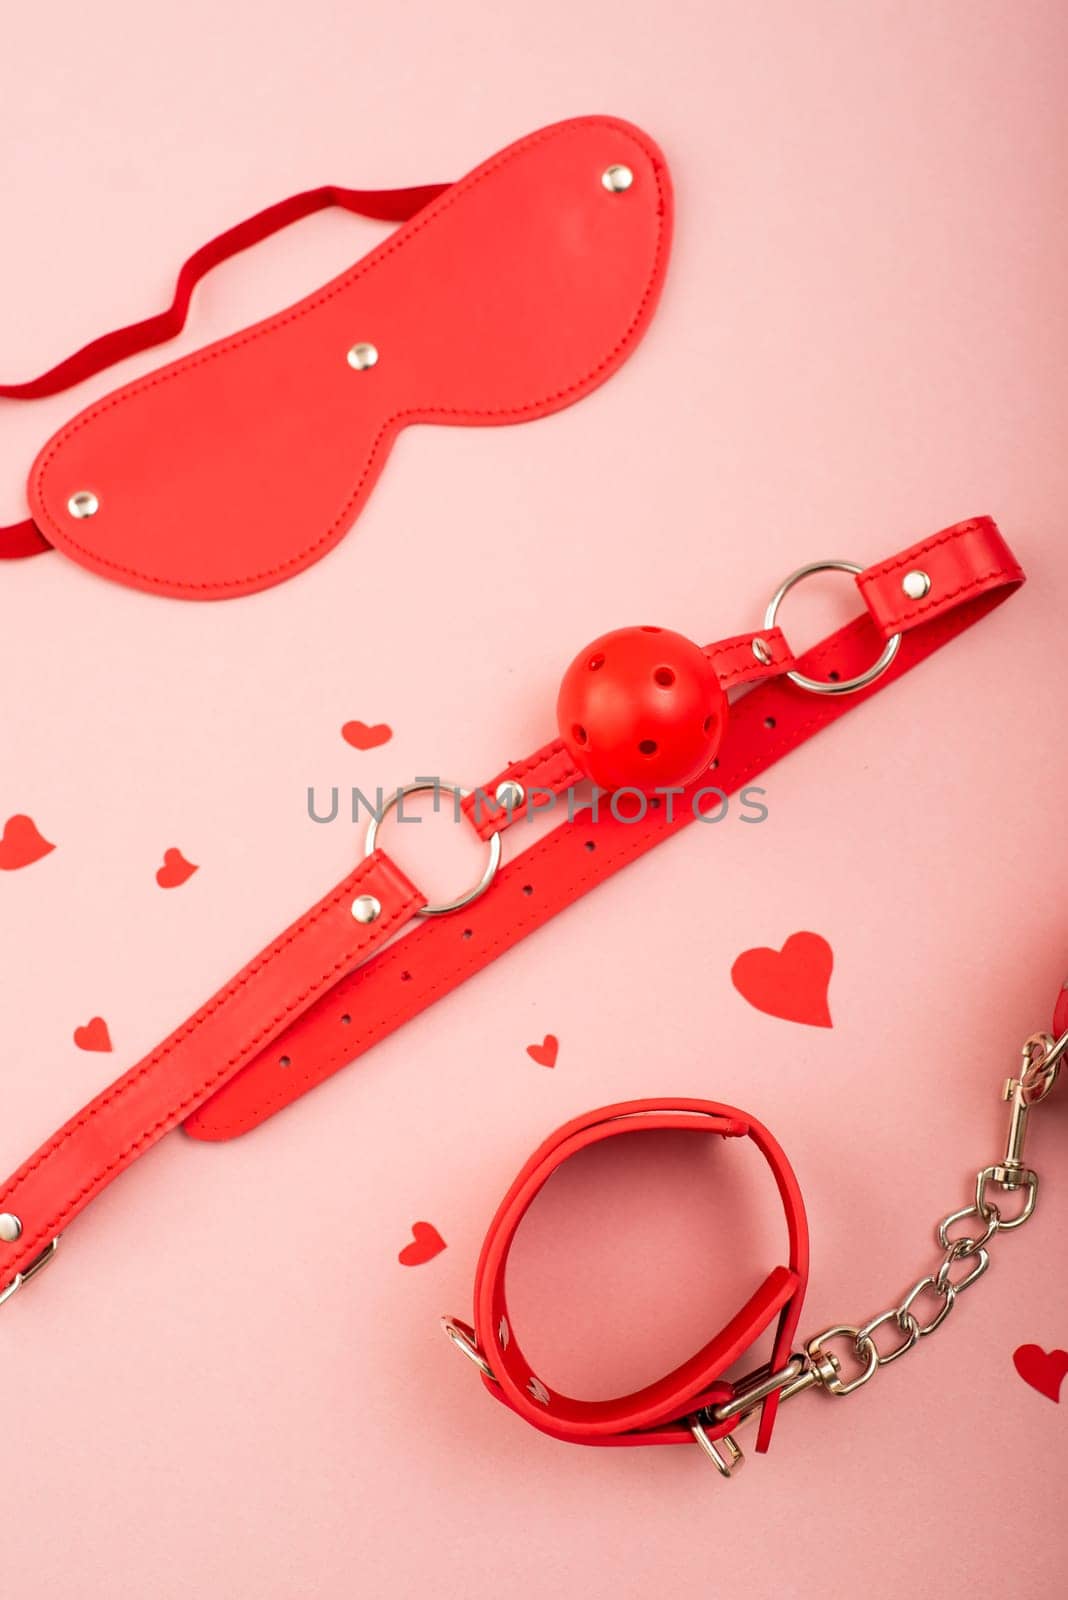 BDSM set in red on a pink background. Love symbol for valentine's day. by mrwed54